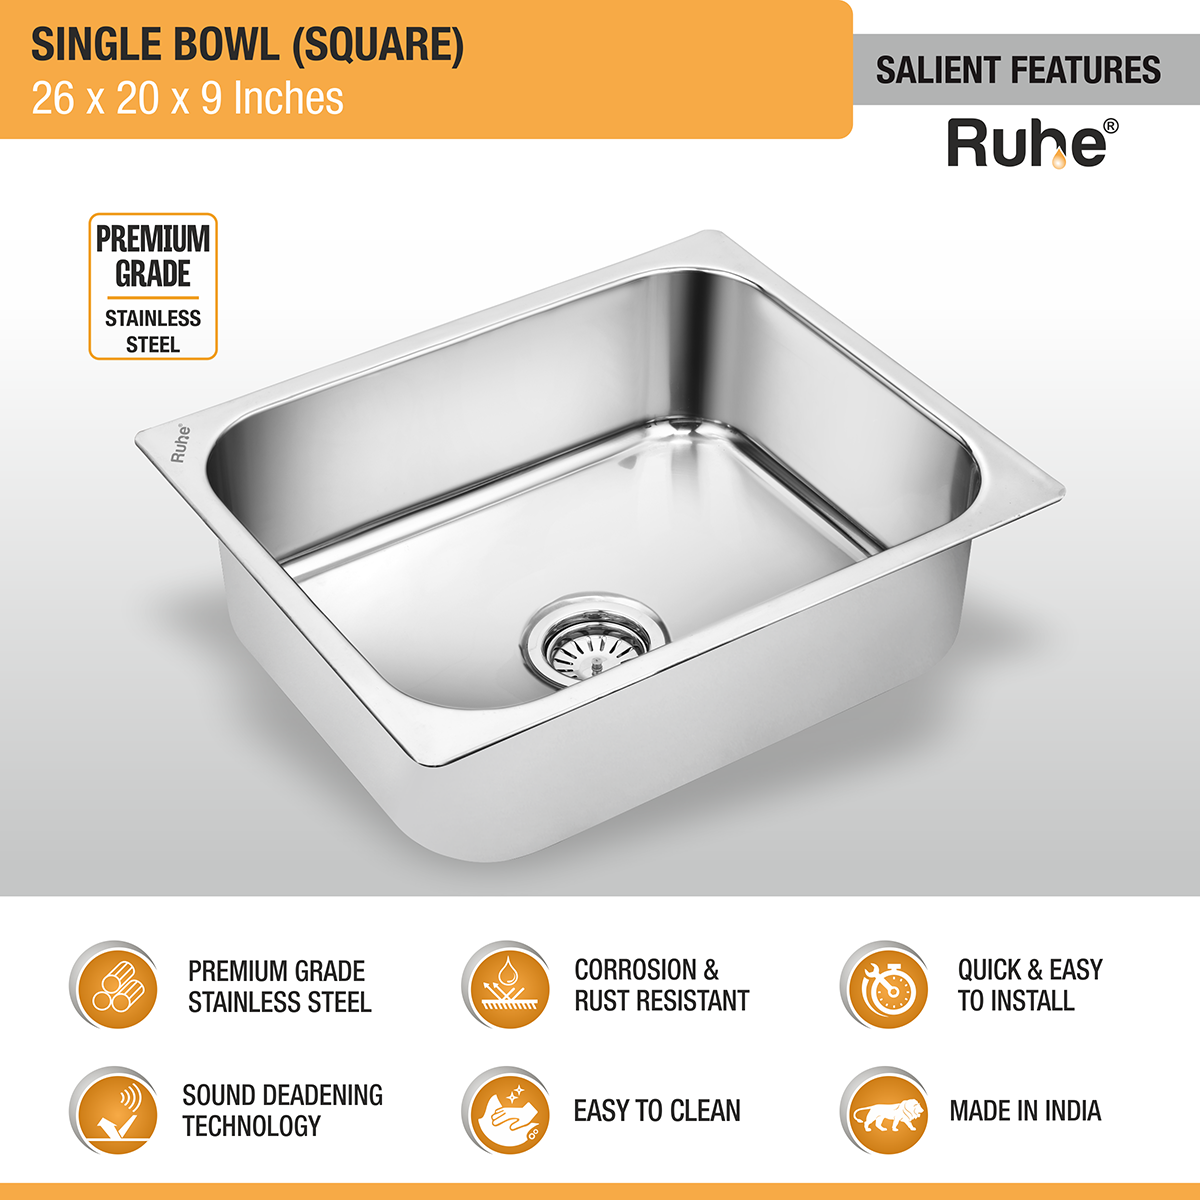 Square Single Bowl Kitchen Sink (26 x 20 x 9 inches) features and benefits